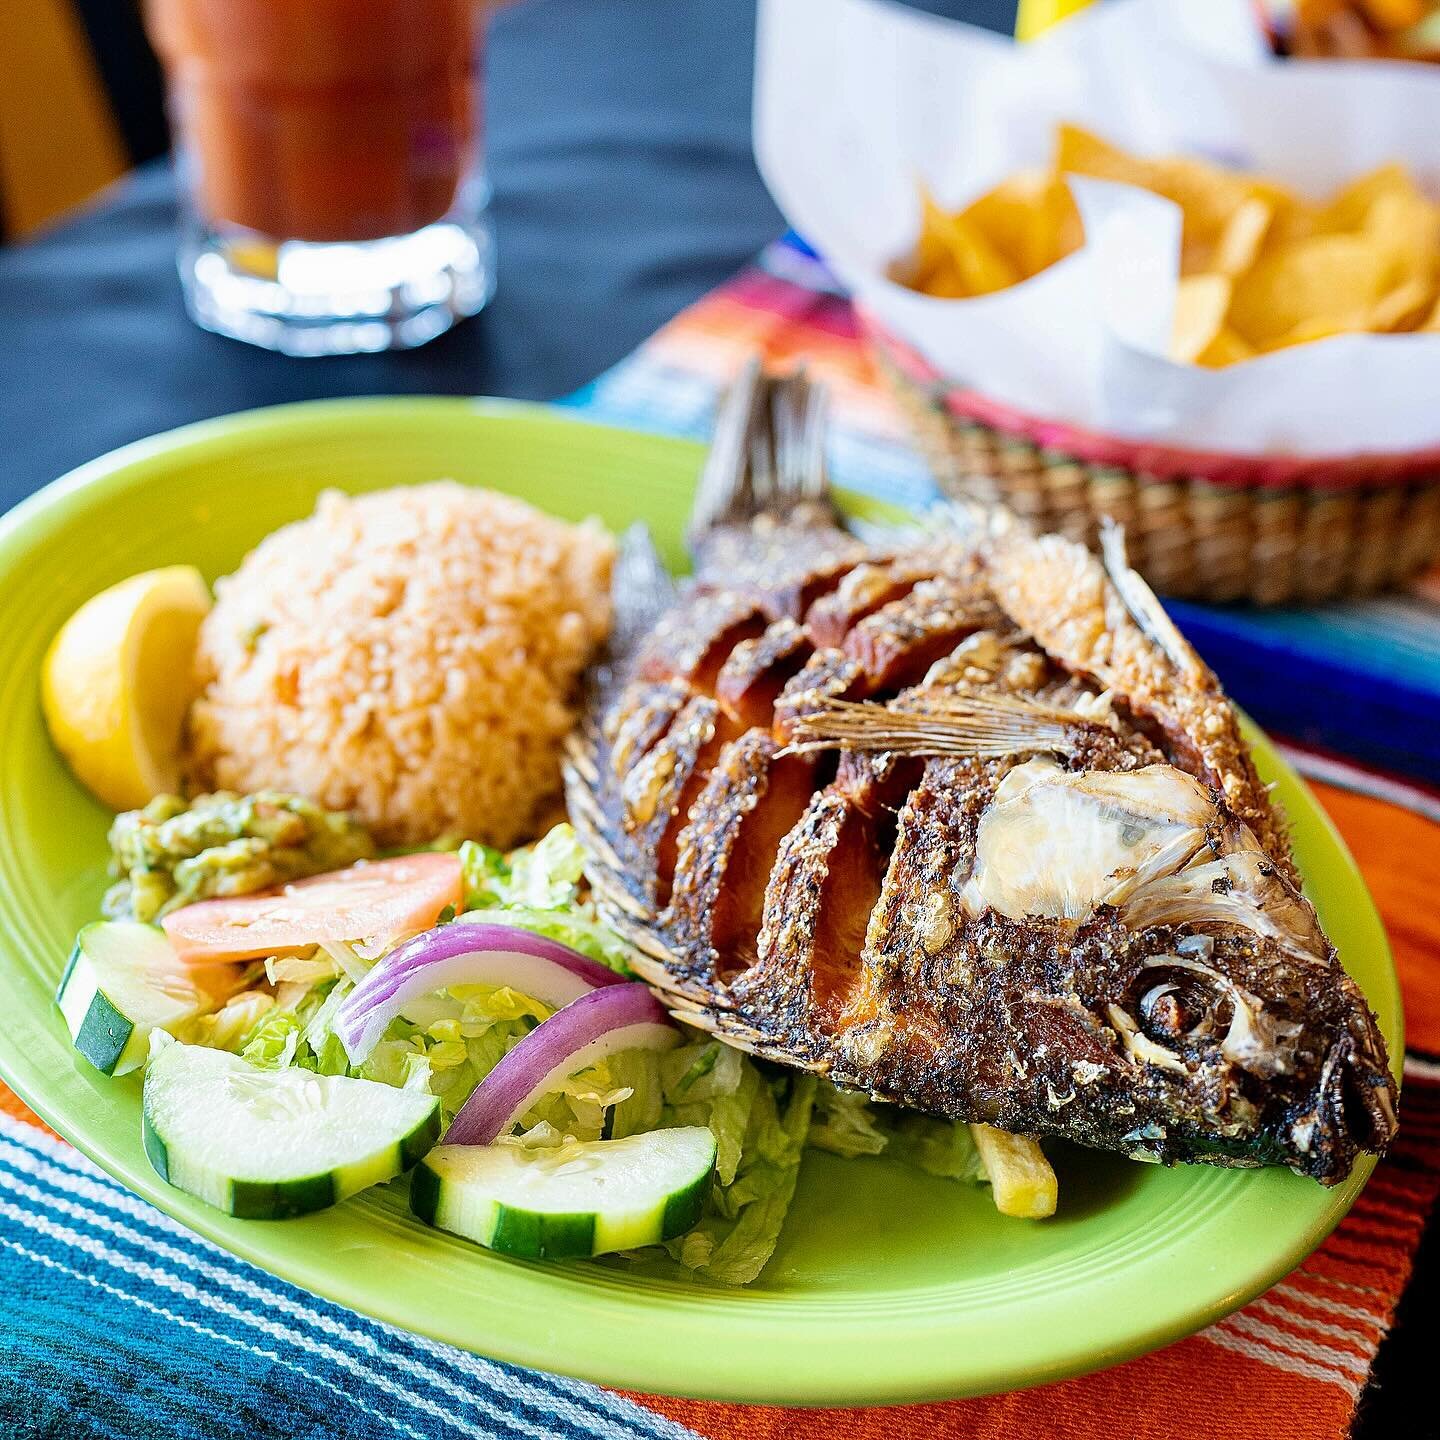 Savoring the crispy goodness of the Mojara Frita at Mi Gusto Es Mexican Restaurant &ndash; a true delight for the taste buds! 🐟🌮 

#MexicanCuisine #FoodieAdventure #MexicanFood #Tacos #Guacamole #Salsa #Burritos #MexicanCuisine #Foodie #MexicanFlav